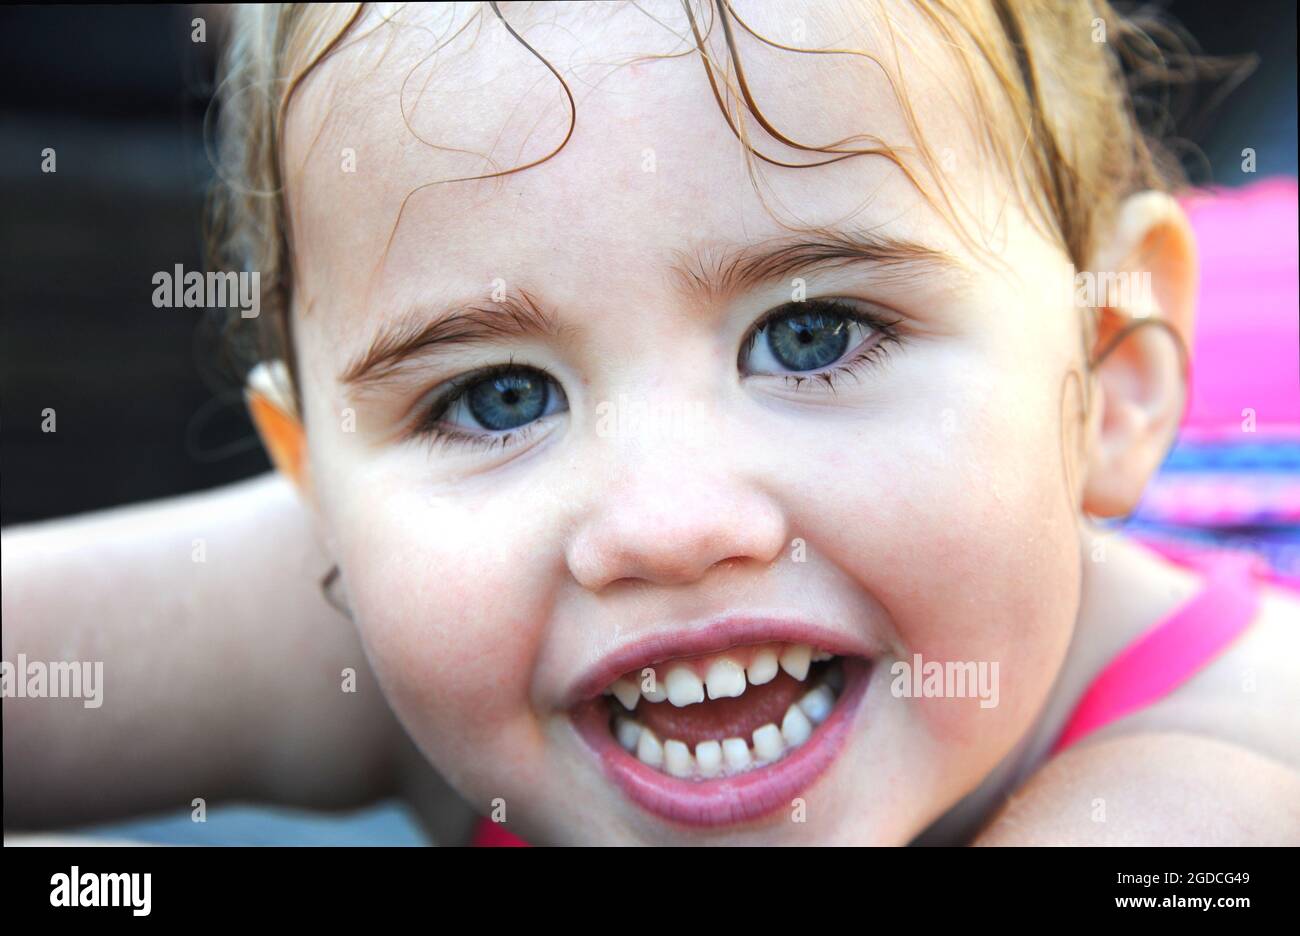 Closeup shows a little girl's wet face.  She has tendrils of hair clining to her forehead.  Her mouth is open in a wide smile. Stock Photo